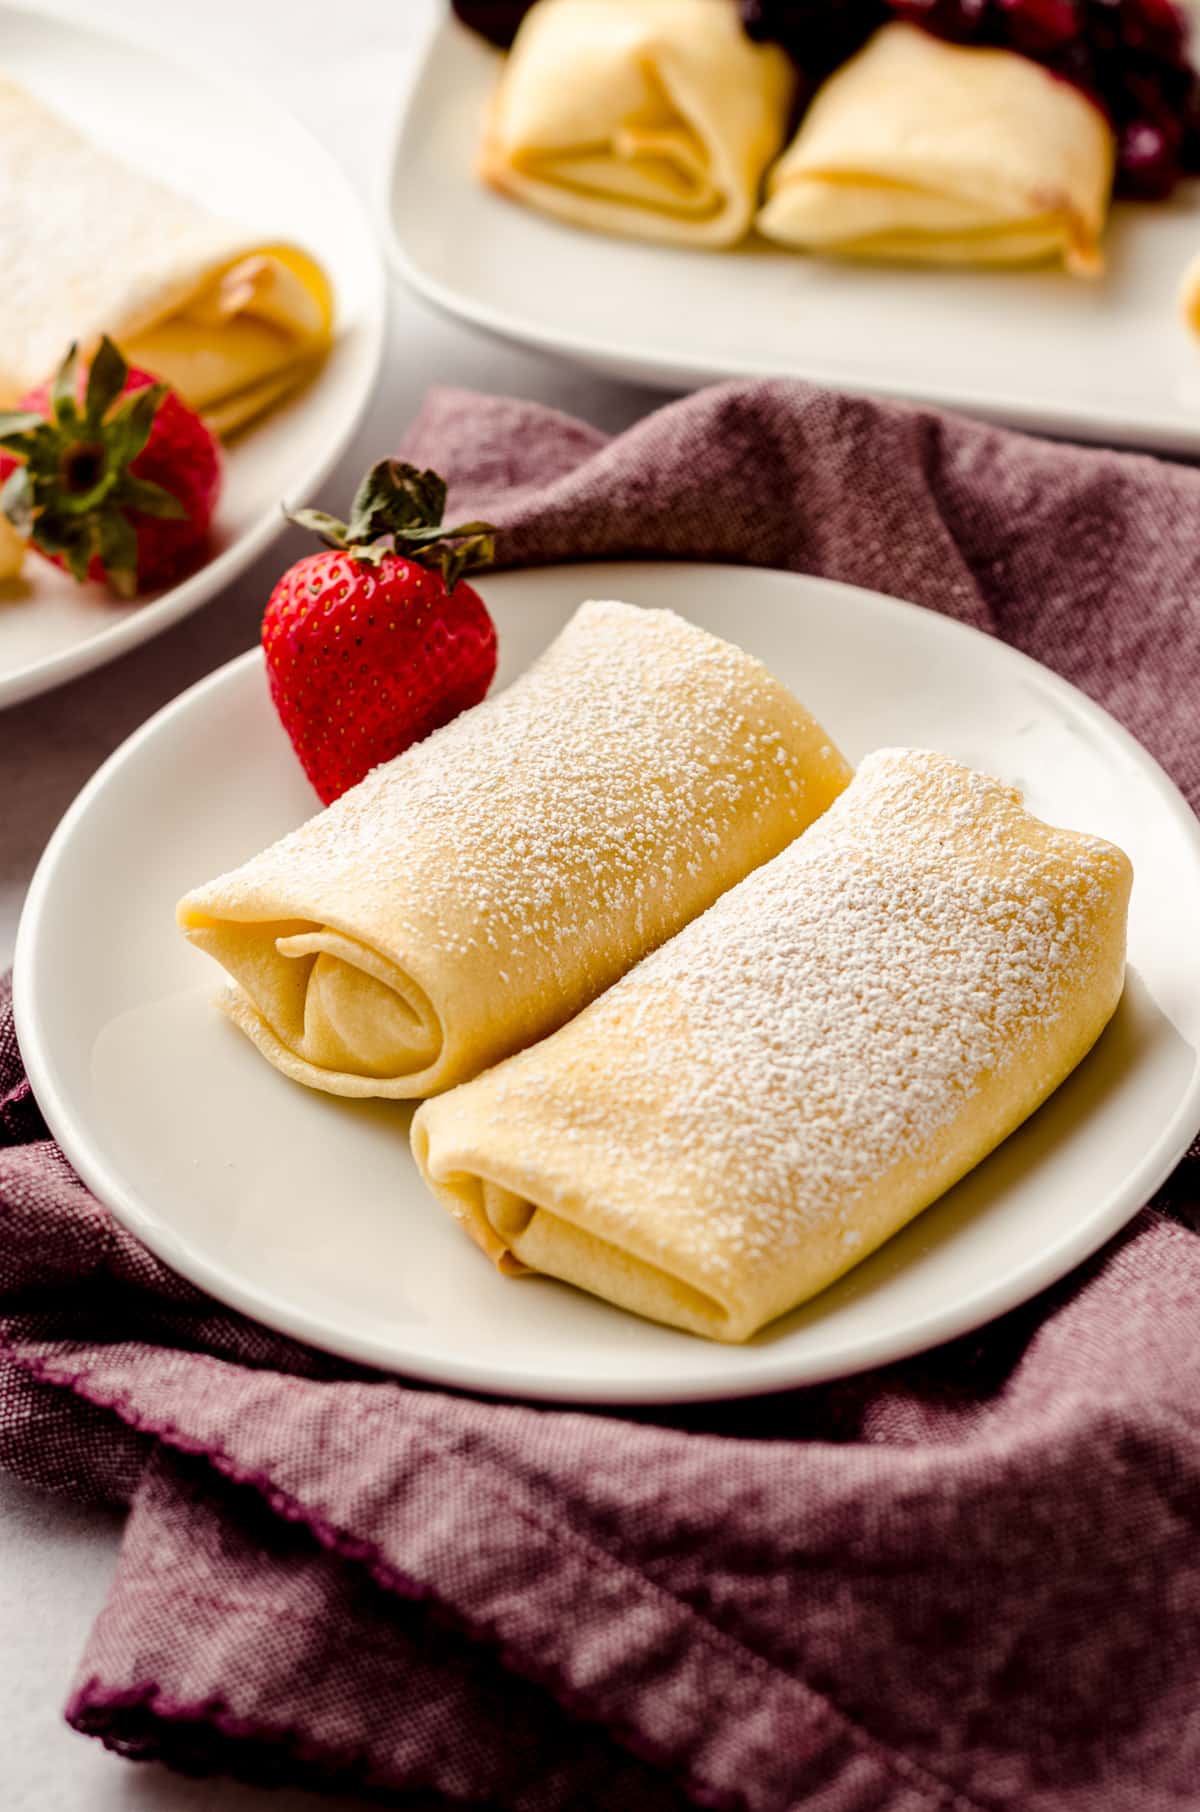 Rolled blintzes on a white plate, garnished with a strawberry.